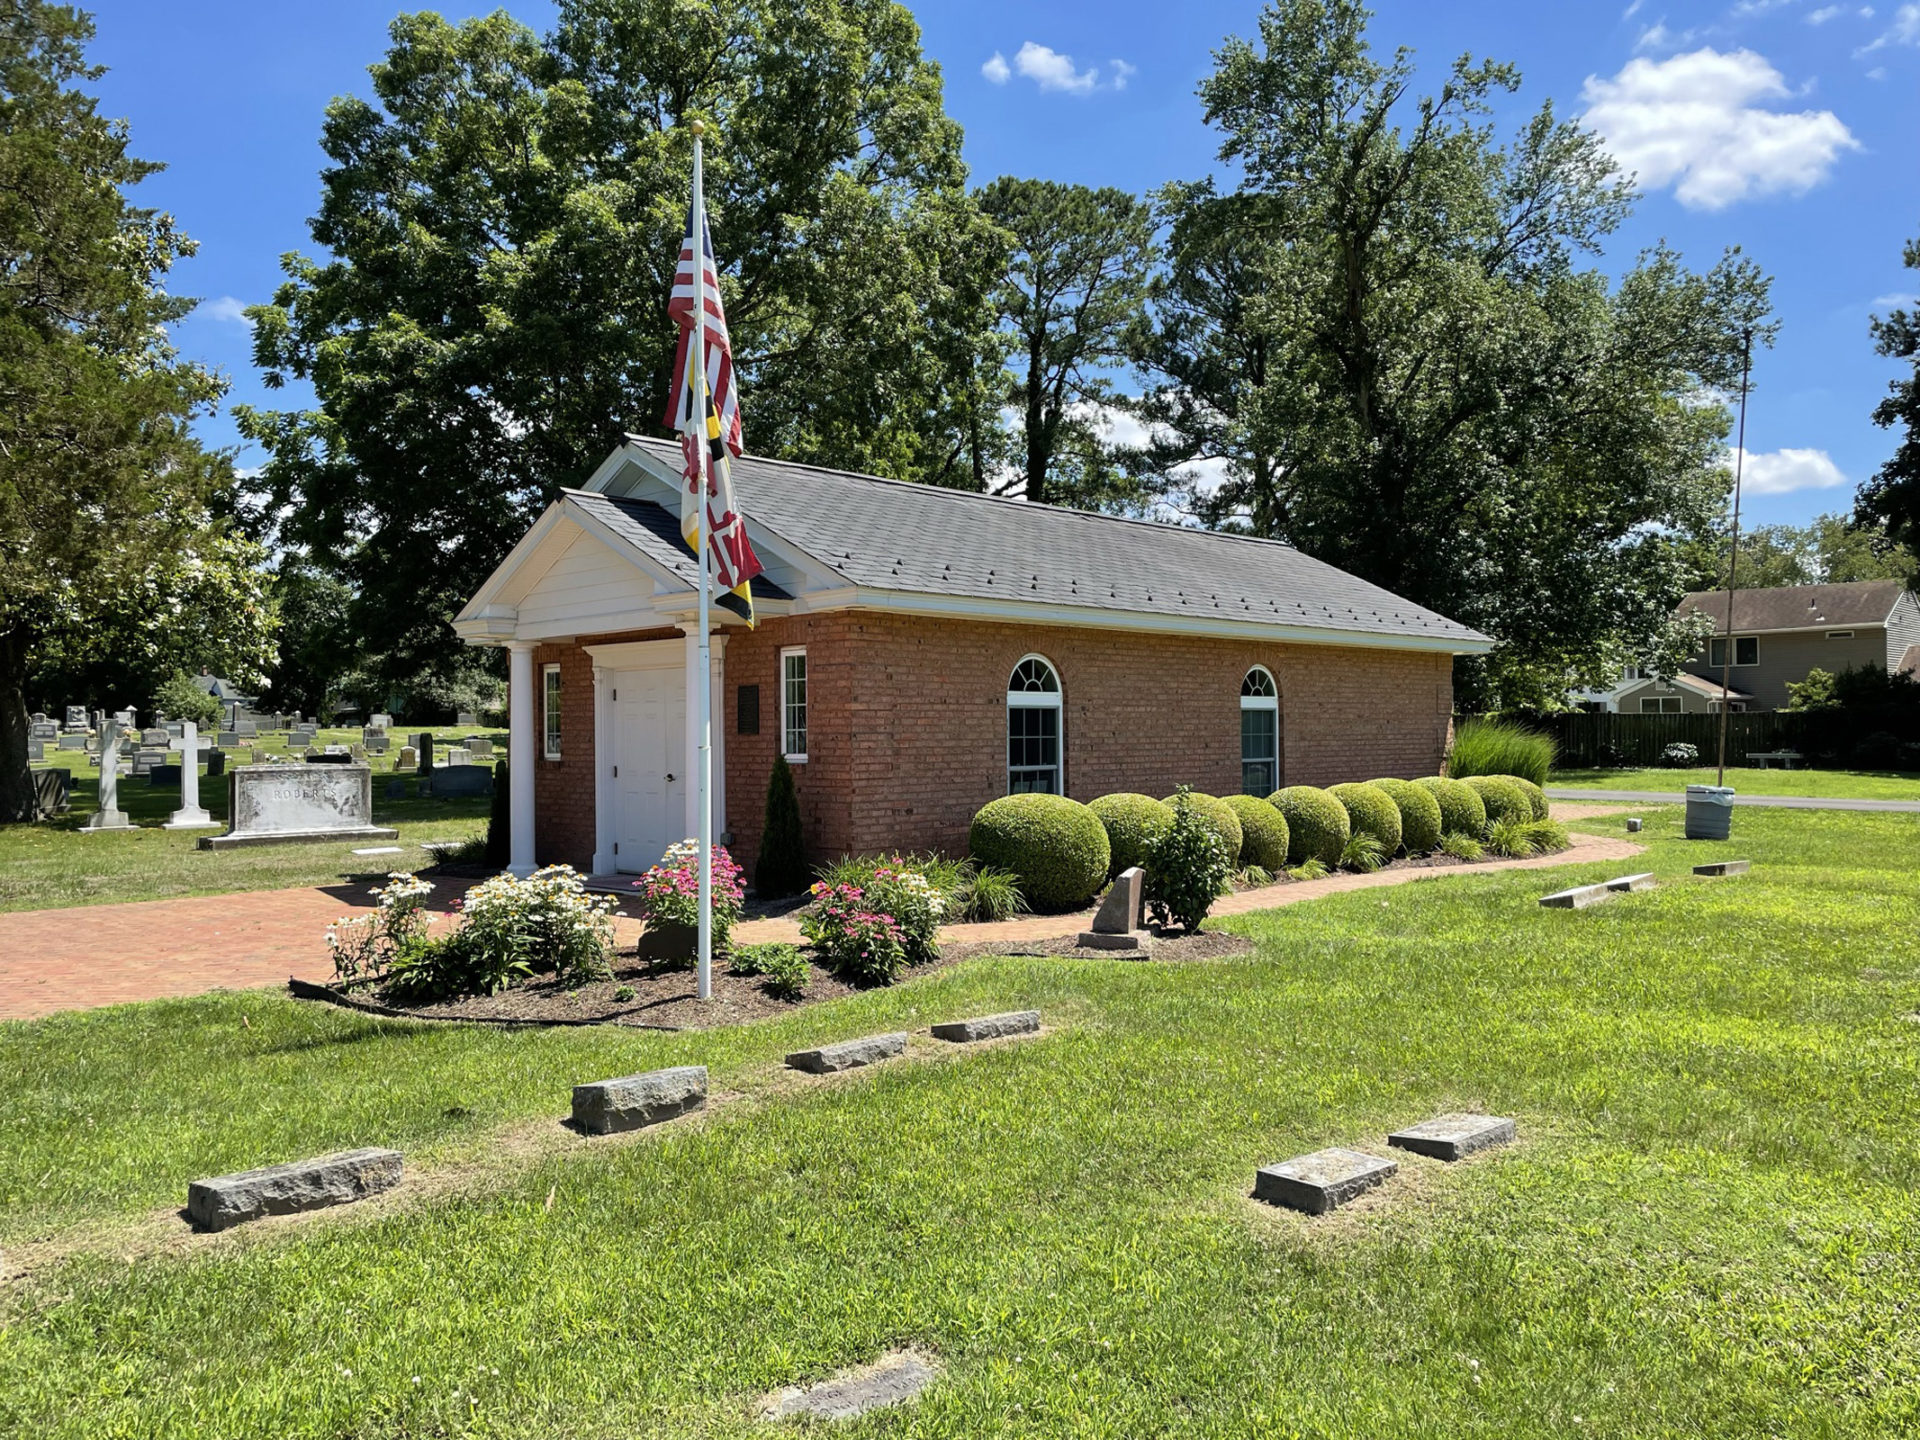 Small brick building at the Parsons Cemetery